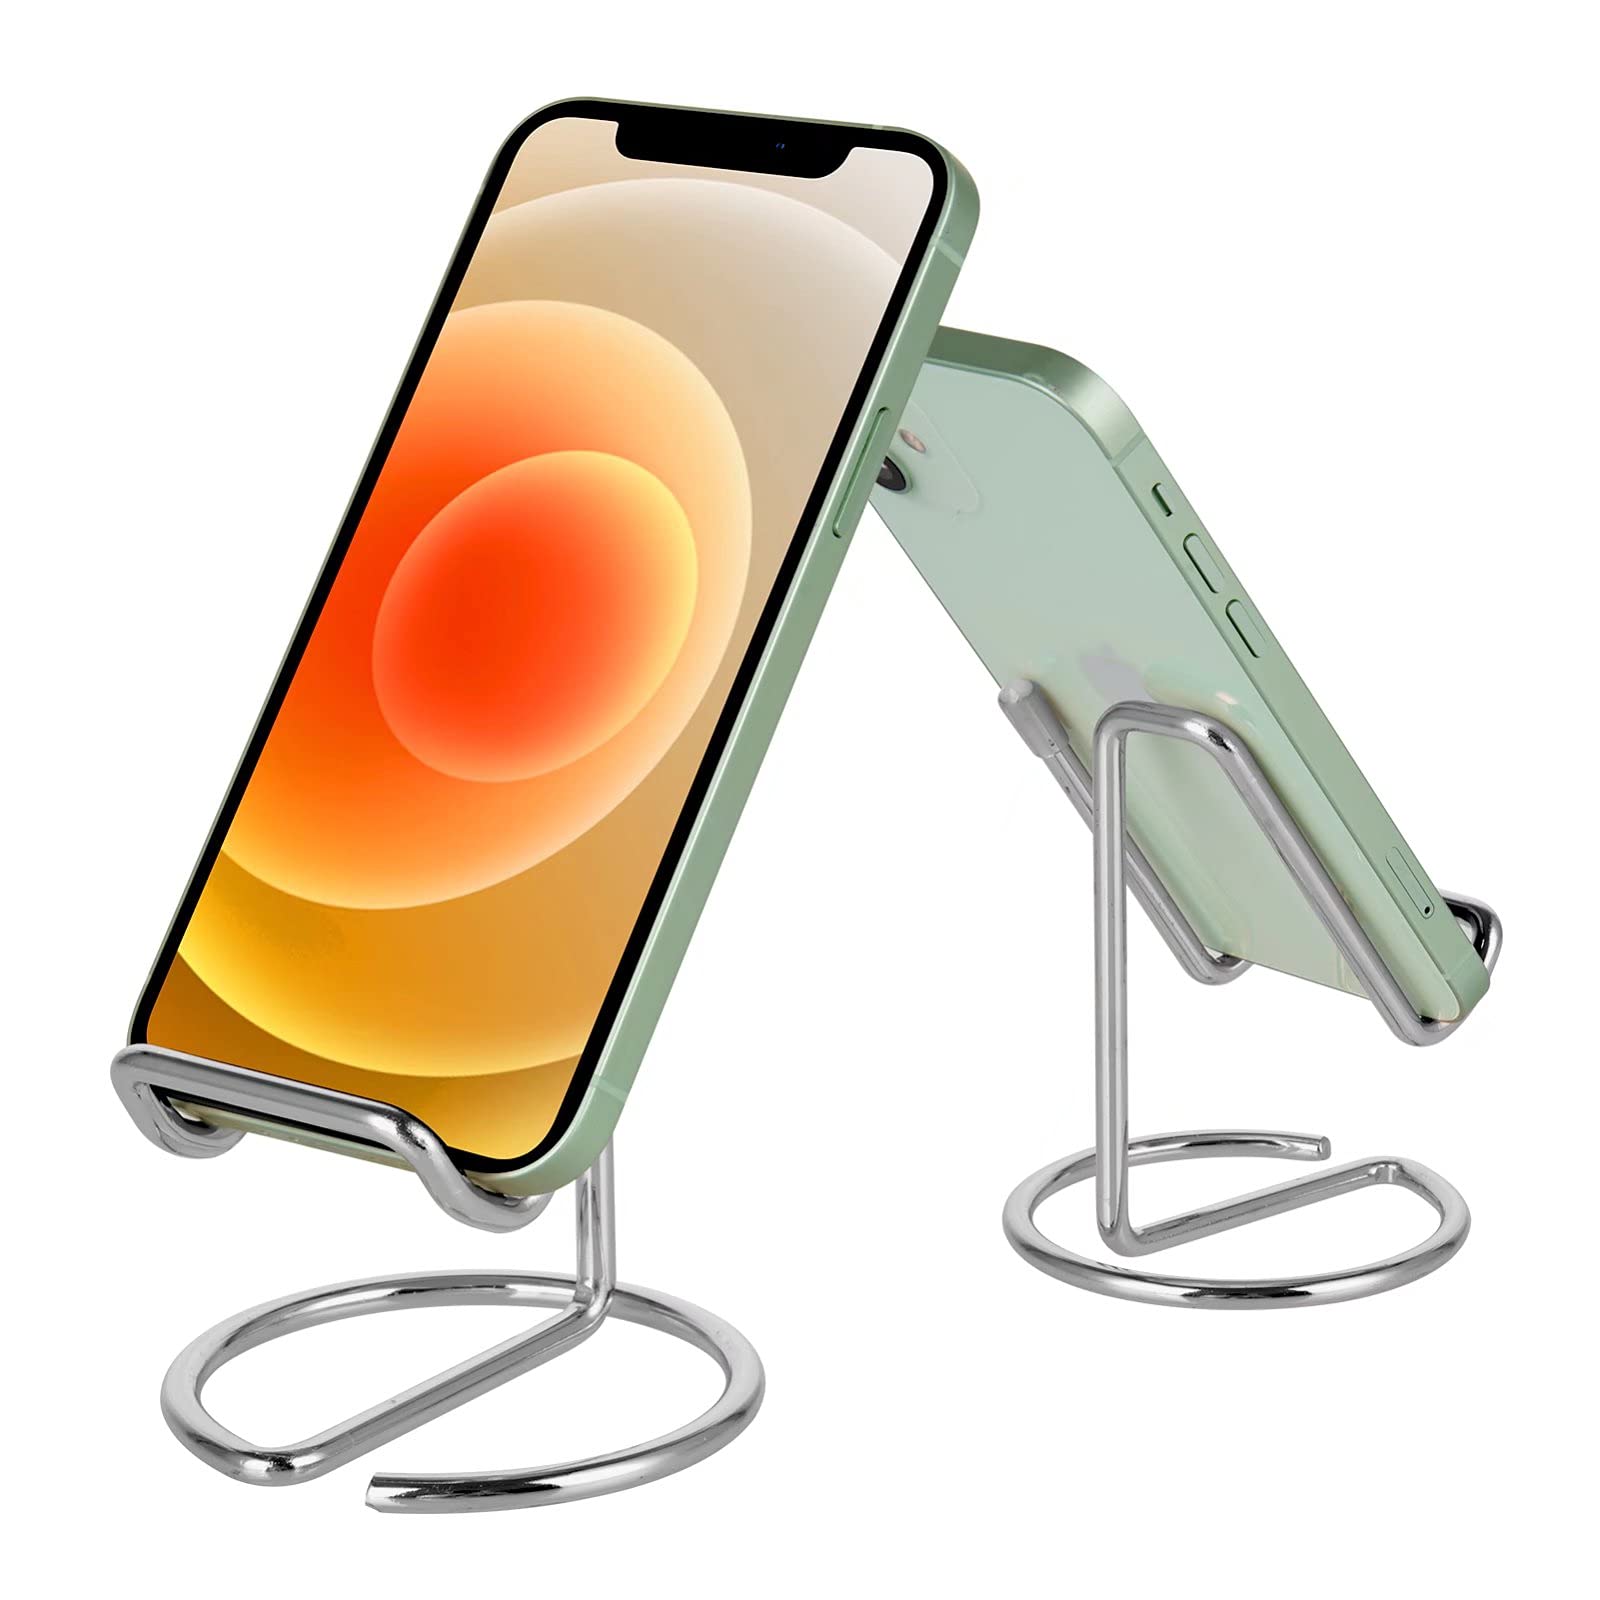 Cell Phone Stand for Desk, Business Card Holder,Cute Metal Cell Phone Stand, Metal Wire Cellphone Cradle Dock for Phone Tablet